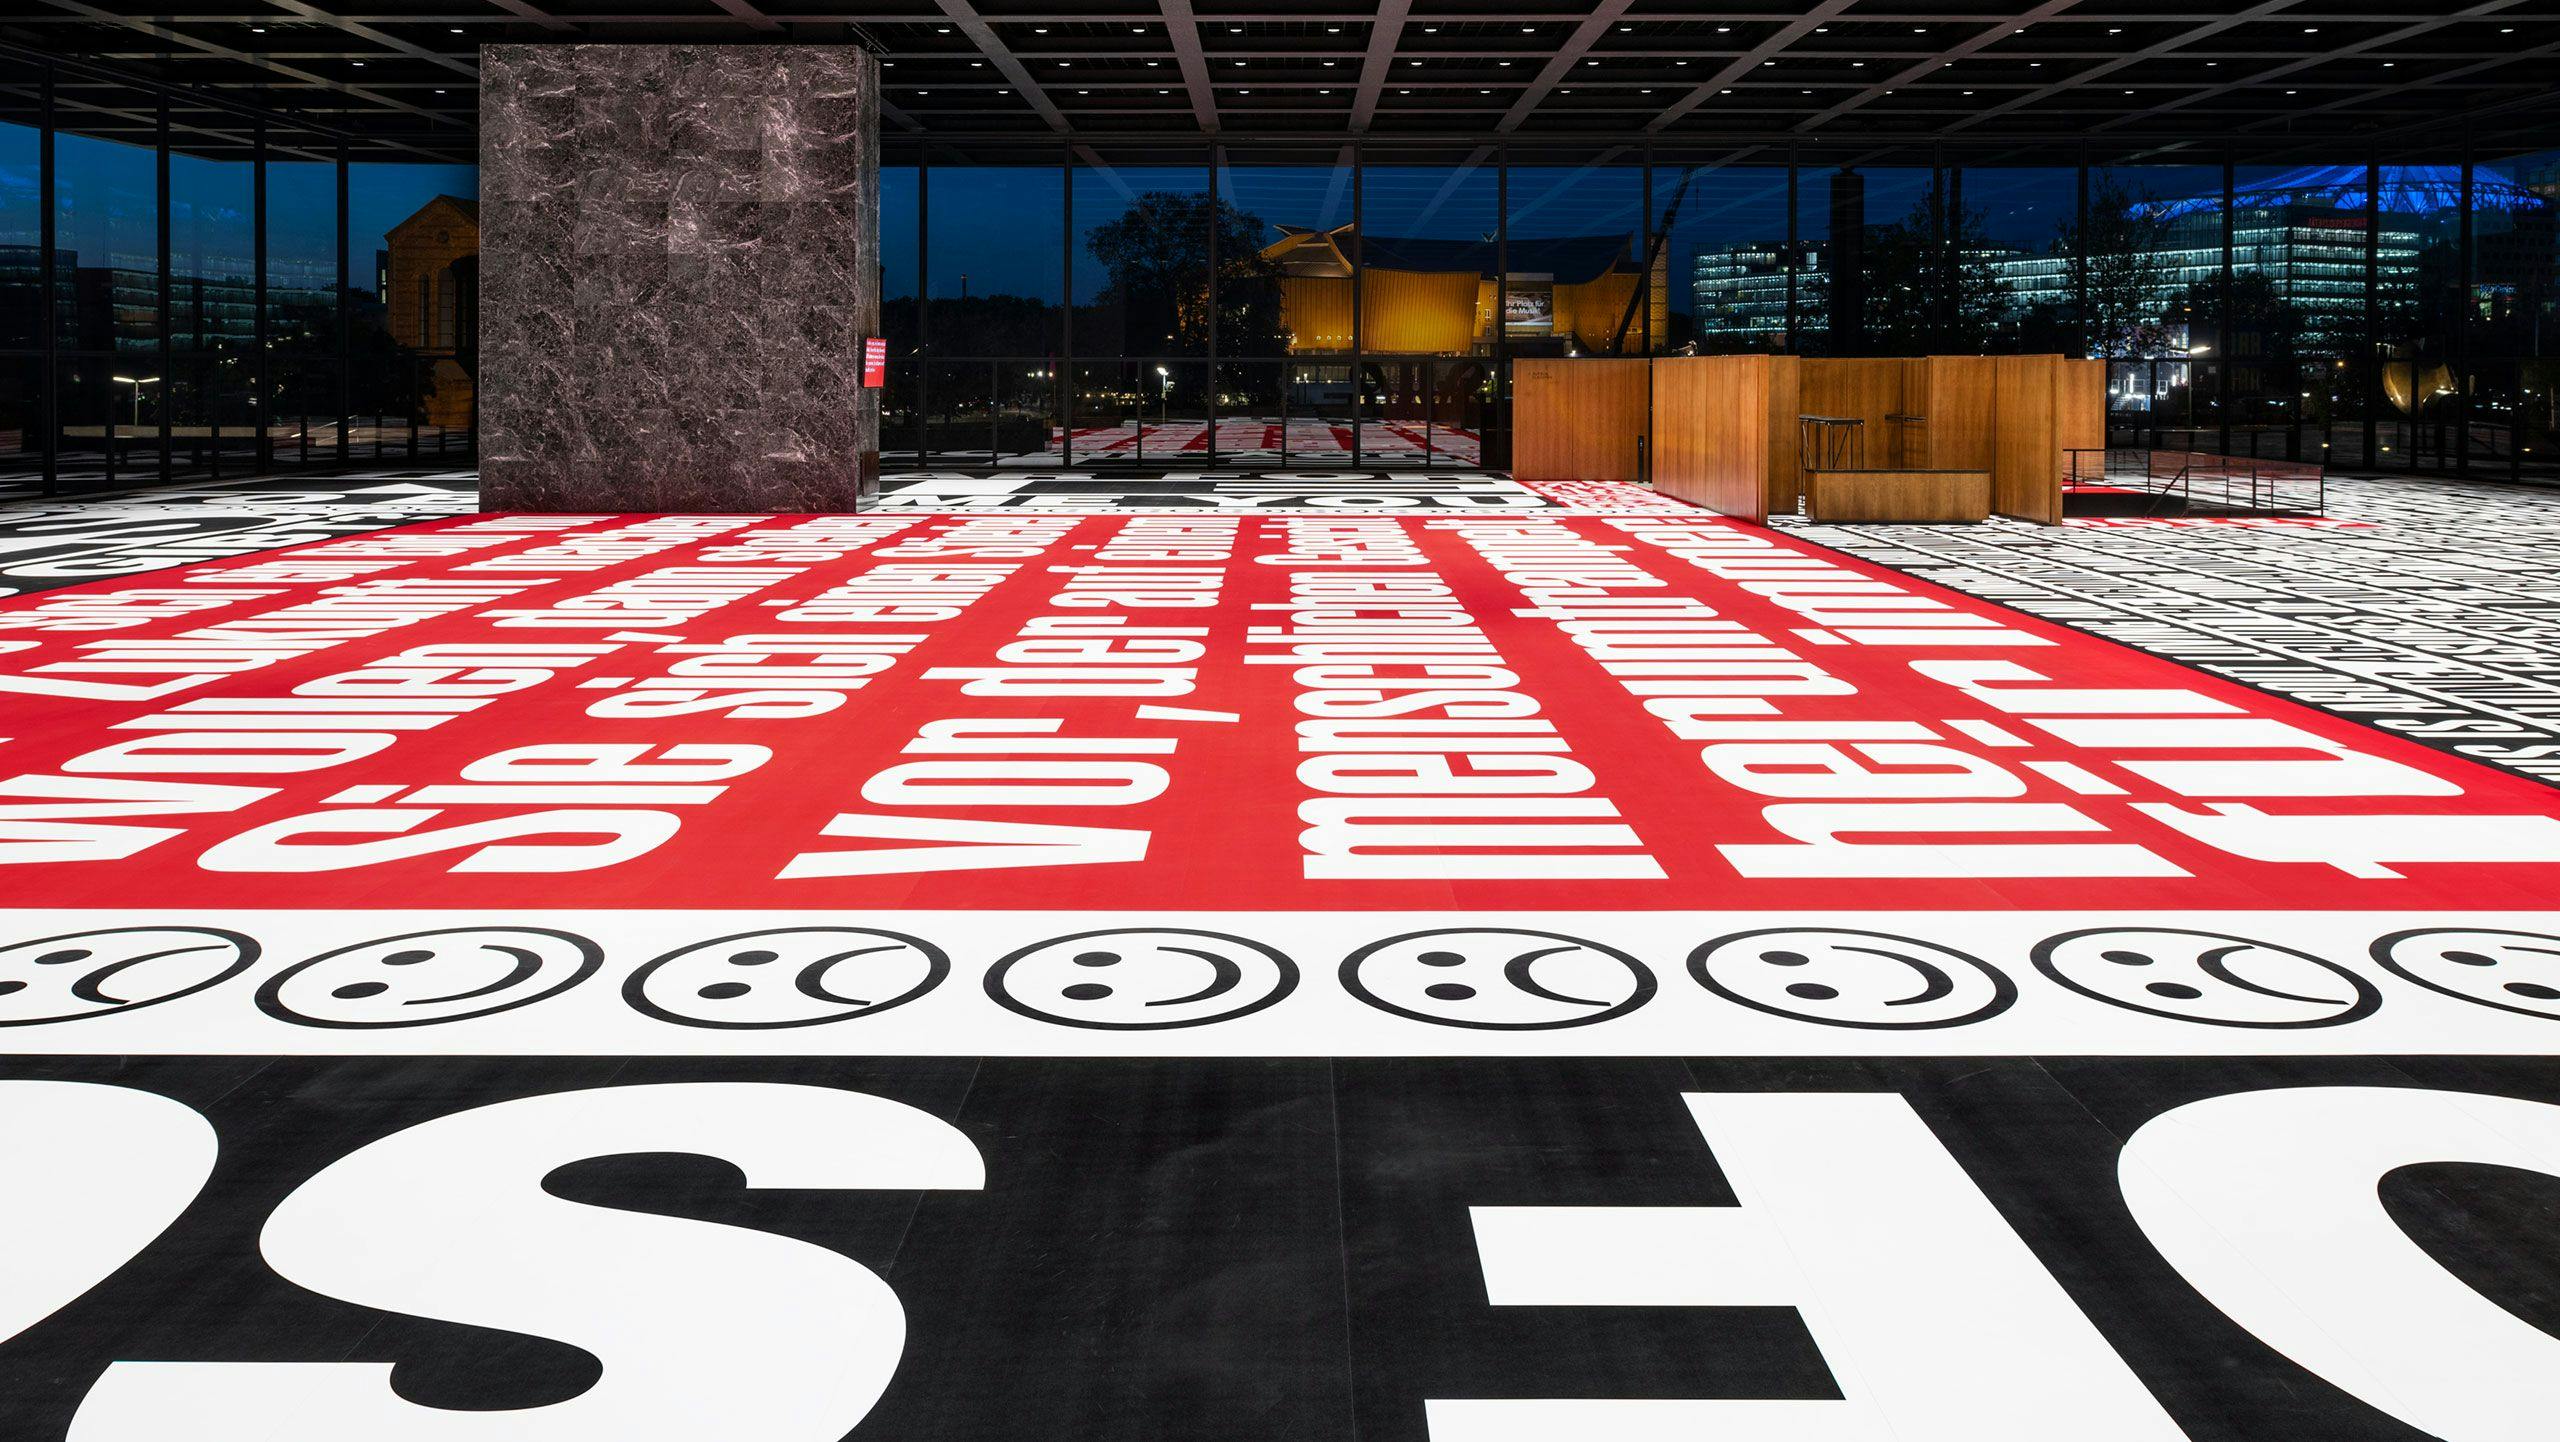 Installation view of the exhibition, Barbara Kruger: Bitte lachen / Please cry, at Neue Nationalgalerie in Berlin, dated 2022.